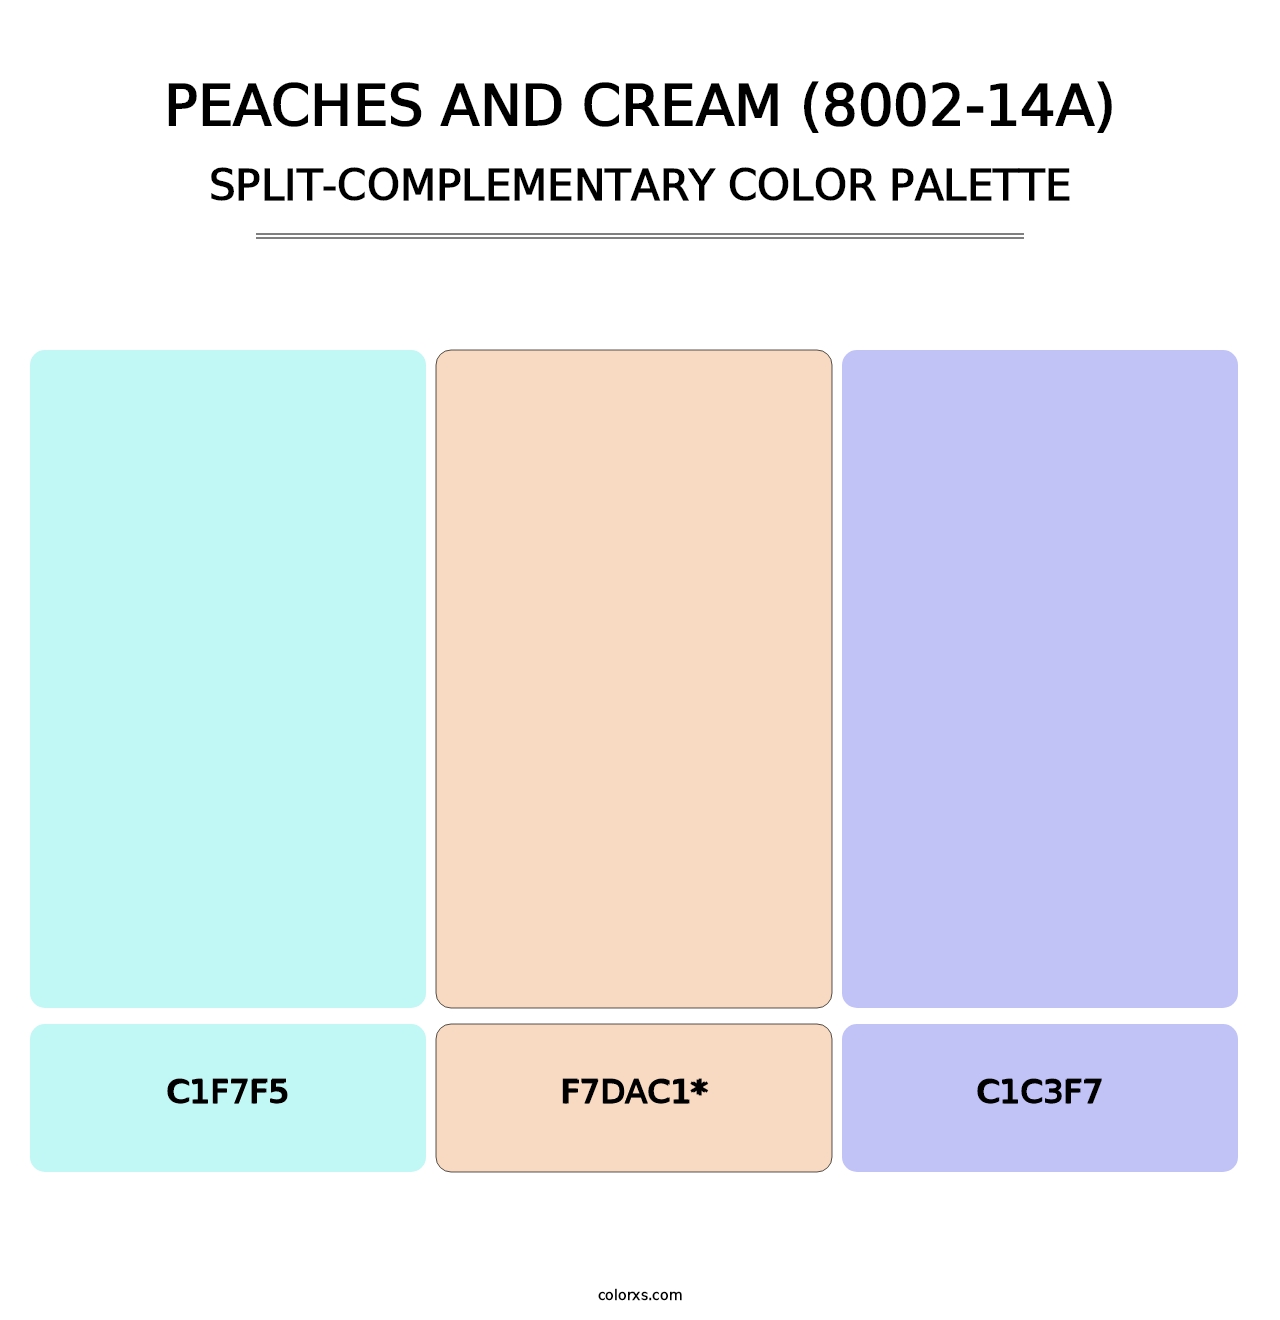 Peaches and Cream (8002-14A) - Split-Complementary Color Palette